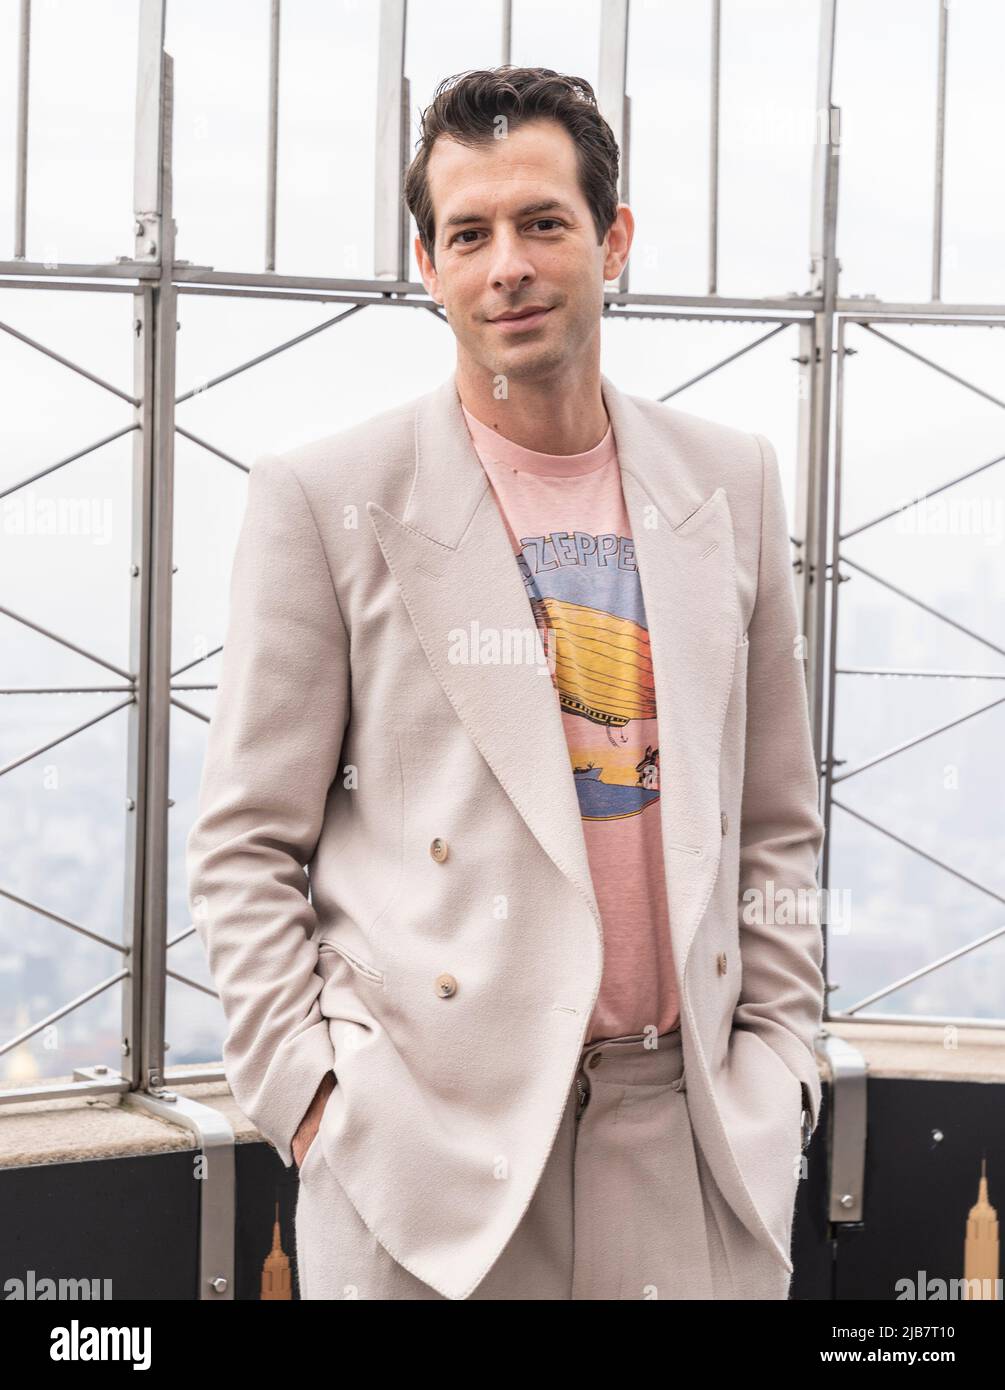 DJ Mark Ronson visits the iconic Empire State Building to light building in purple and gold to honor the Platinum Jubilee of Queen Elizebeth II in New York on June 3, 2022. (Photo by Lev Radin/Sipa USA) Stock Photo